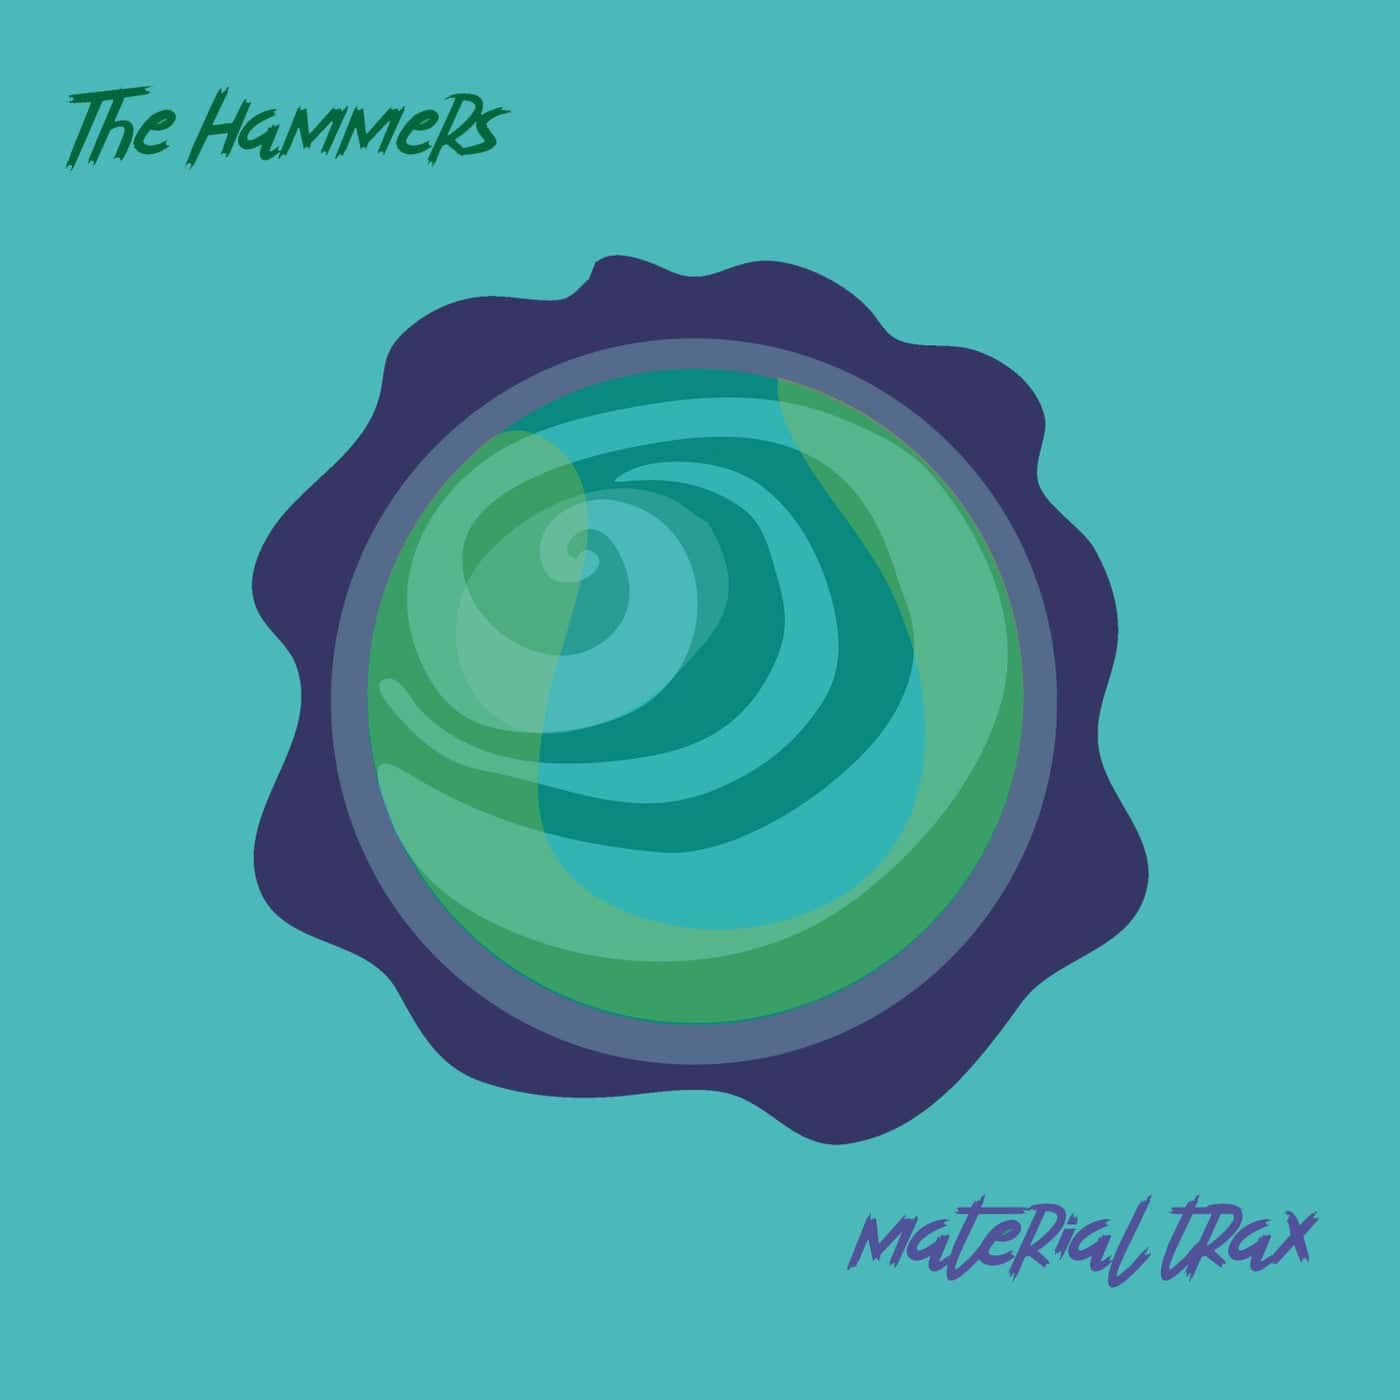 Download The Hammers, Vol. VII on Electrobuzz